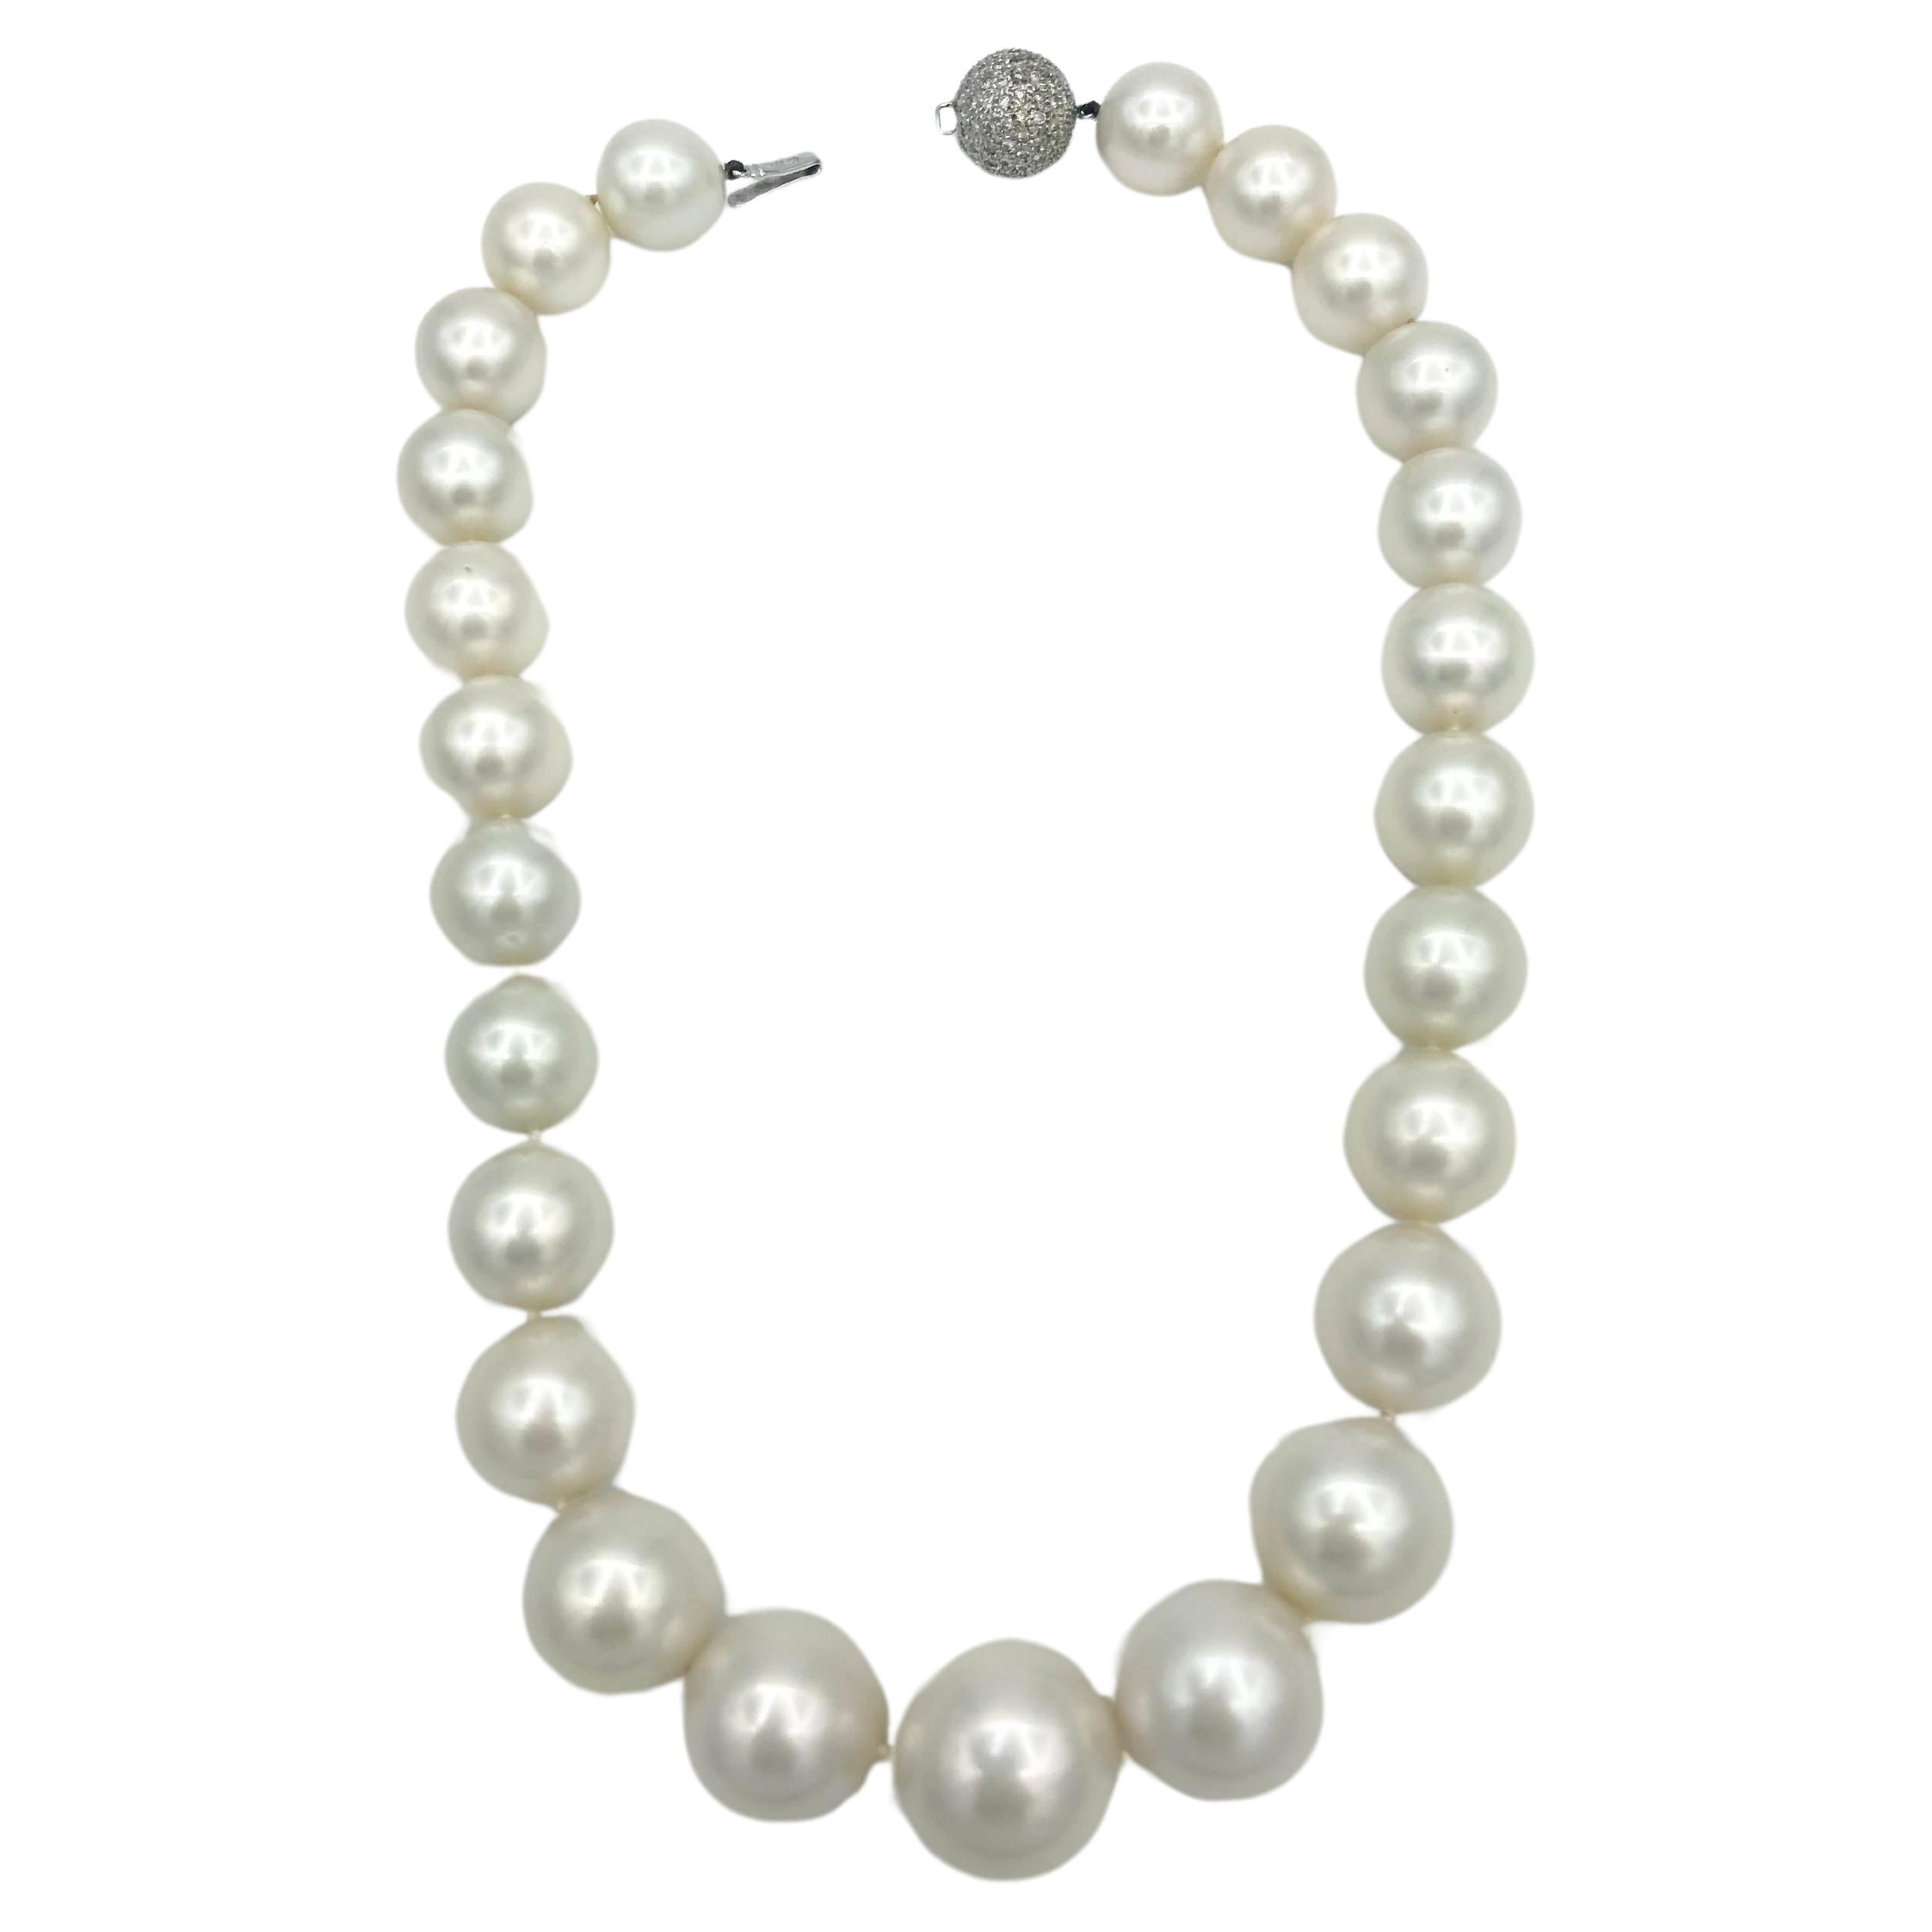 What is the rarest color of pearl?